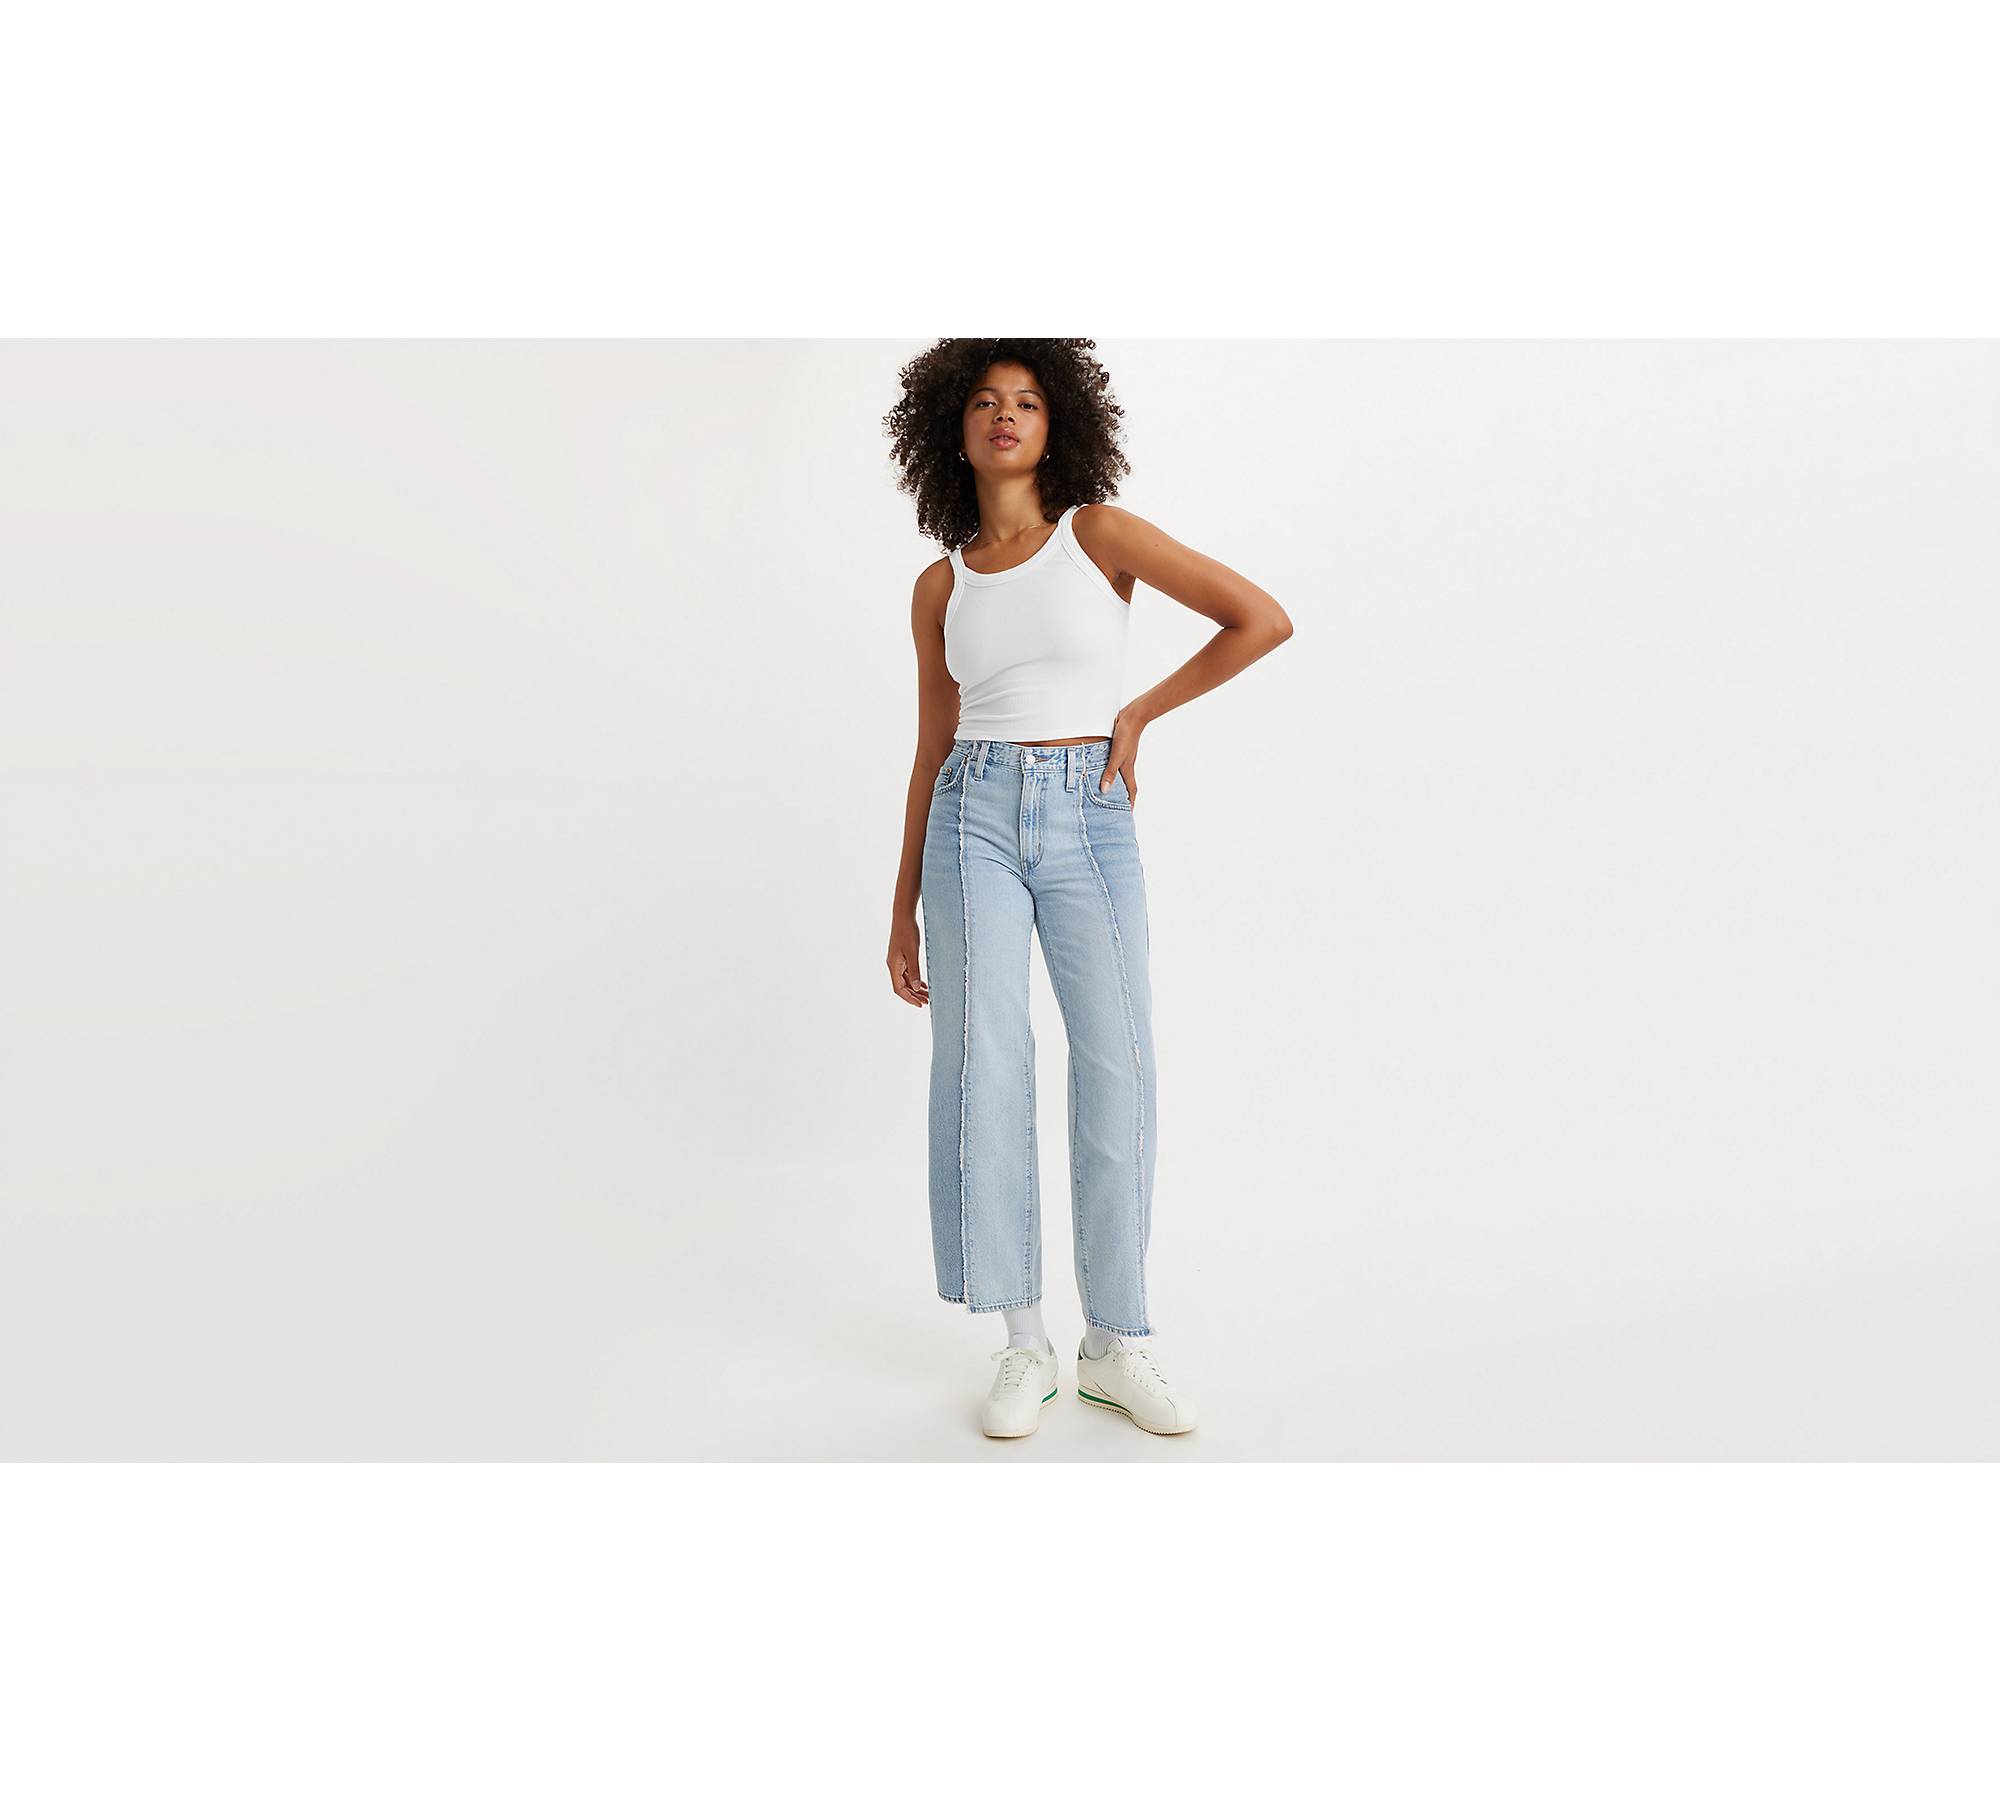 Baggy Dad Recrafted Women's Jeans - Medium Wash | Levi's® US